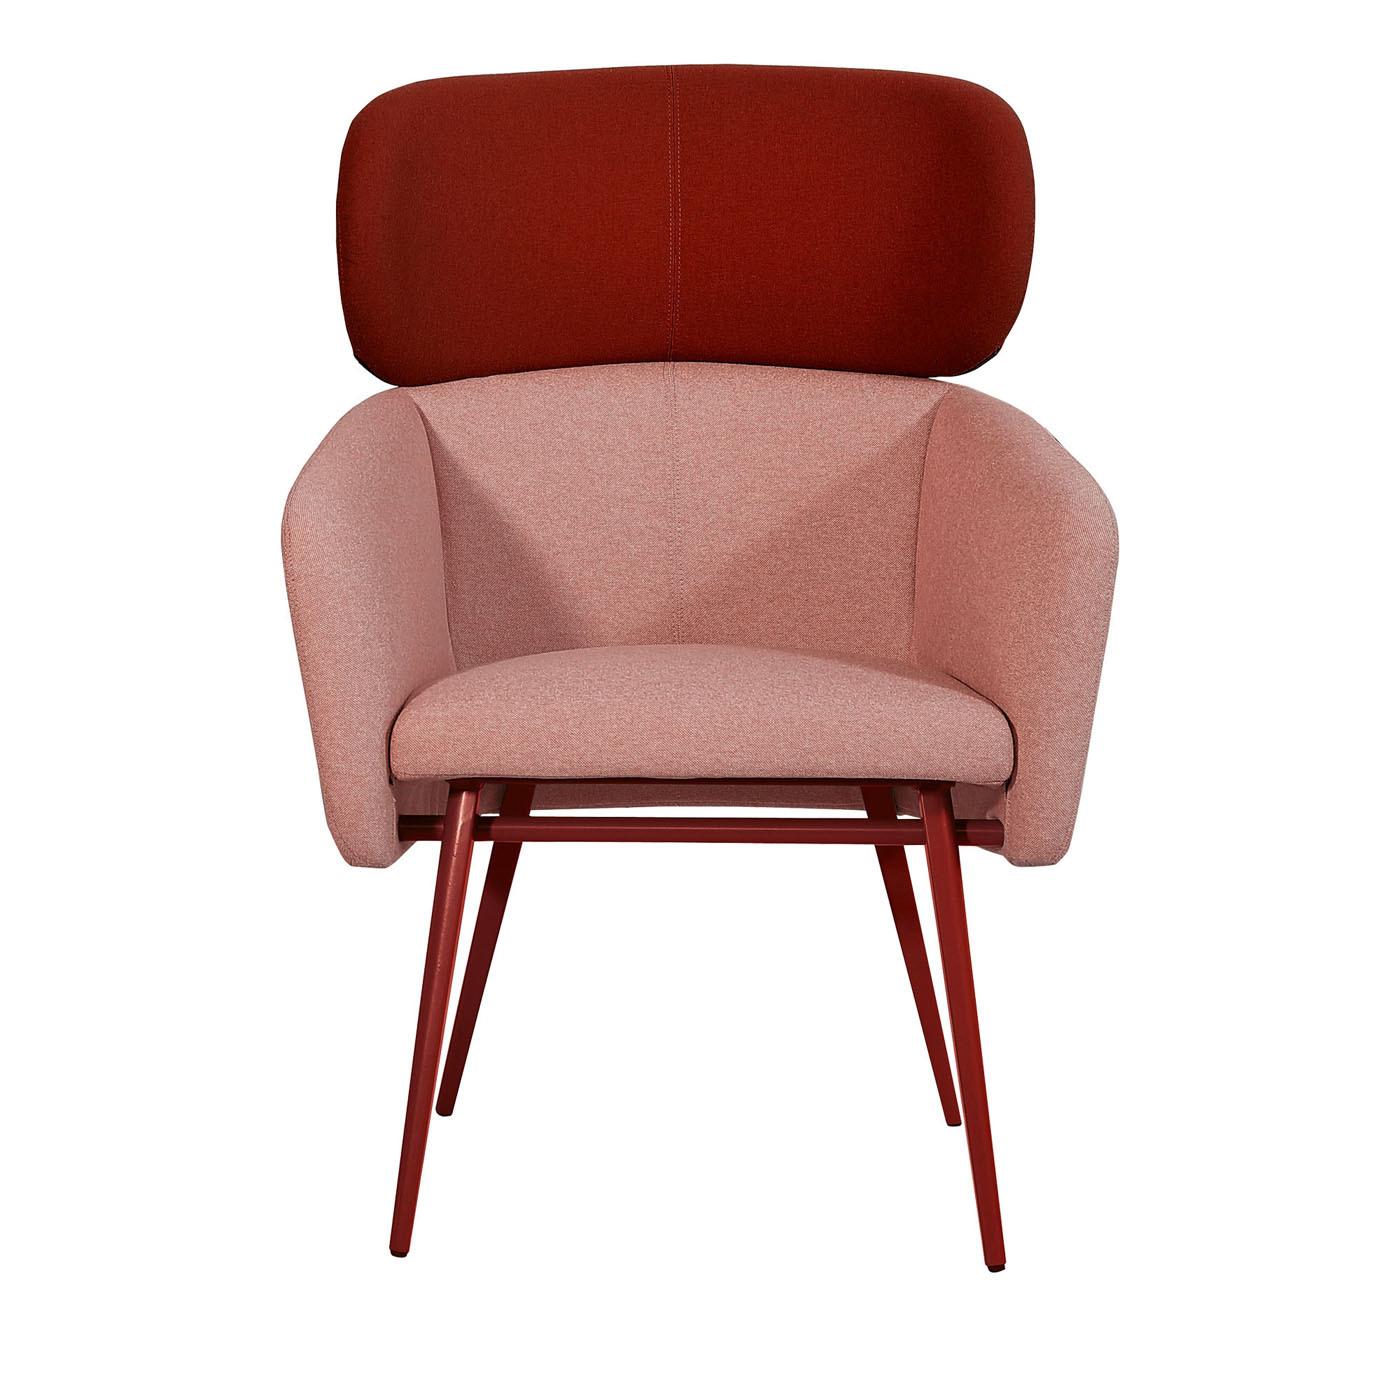 Combining an elegant burgundy hue in the upper part of the backrest and in the slanted, slim legs with a delicate pink color covering the welcoming seat and armrests, this chair will be a romantic and sophisticated addition to any modern living or